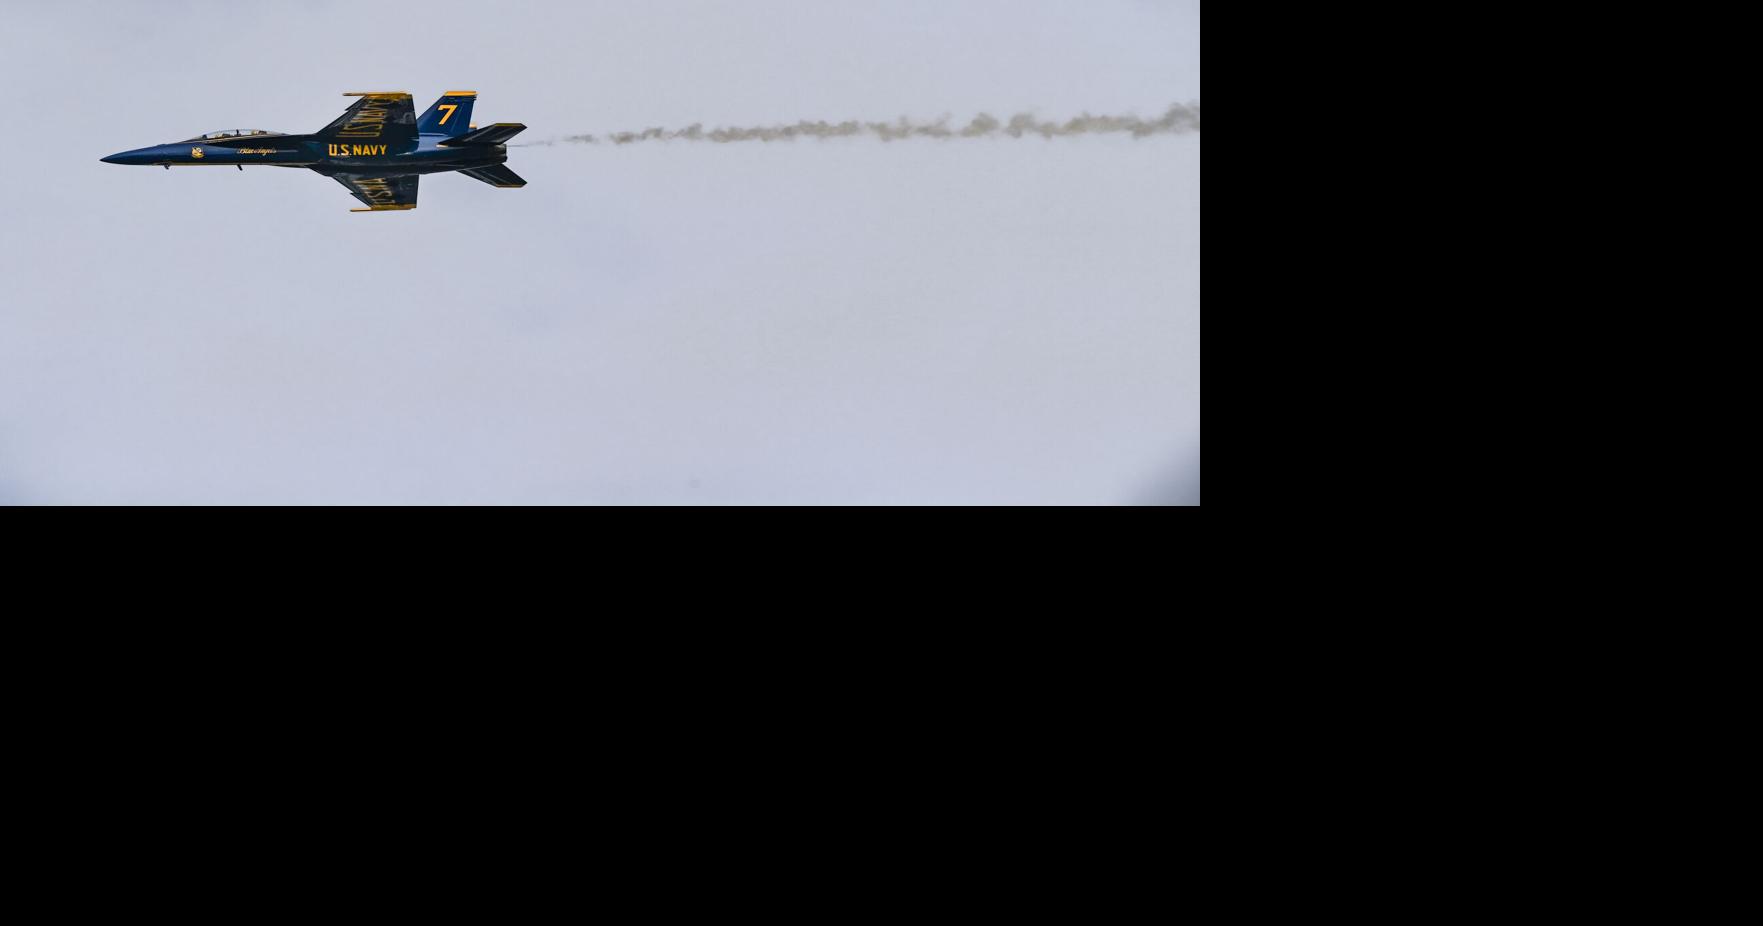 Blue Angels provide sneakpreview of airshow in Billings